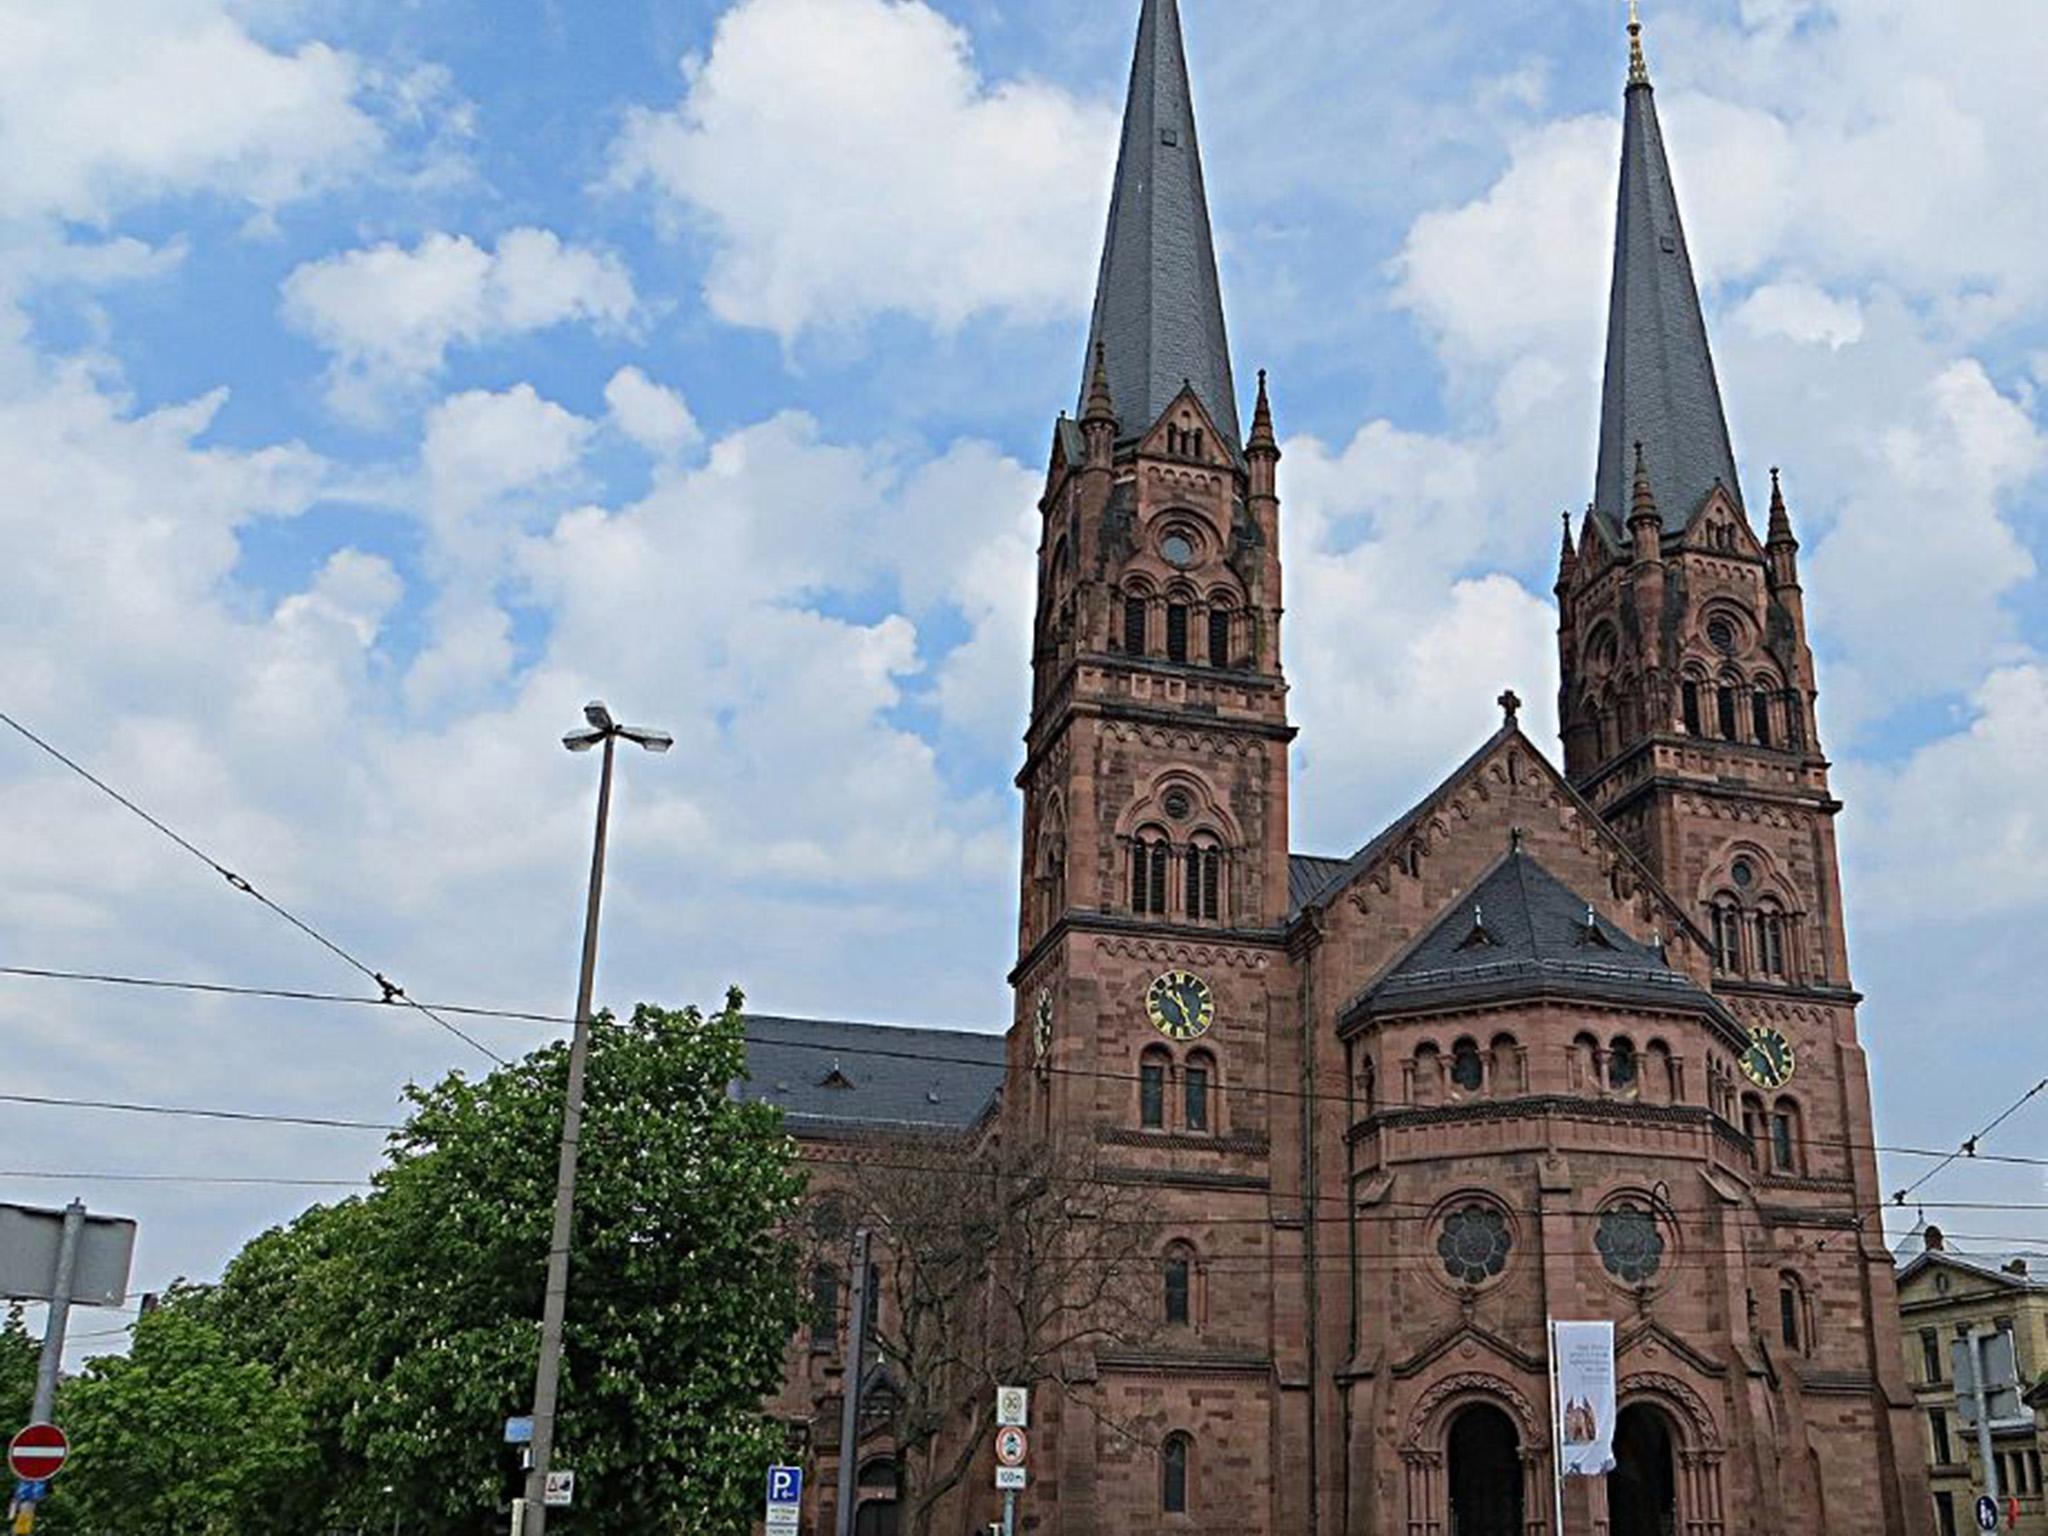 The man was insulted and punched after urinating near the Johannes Church in Freiburg